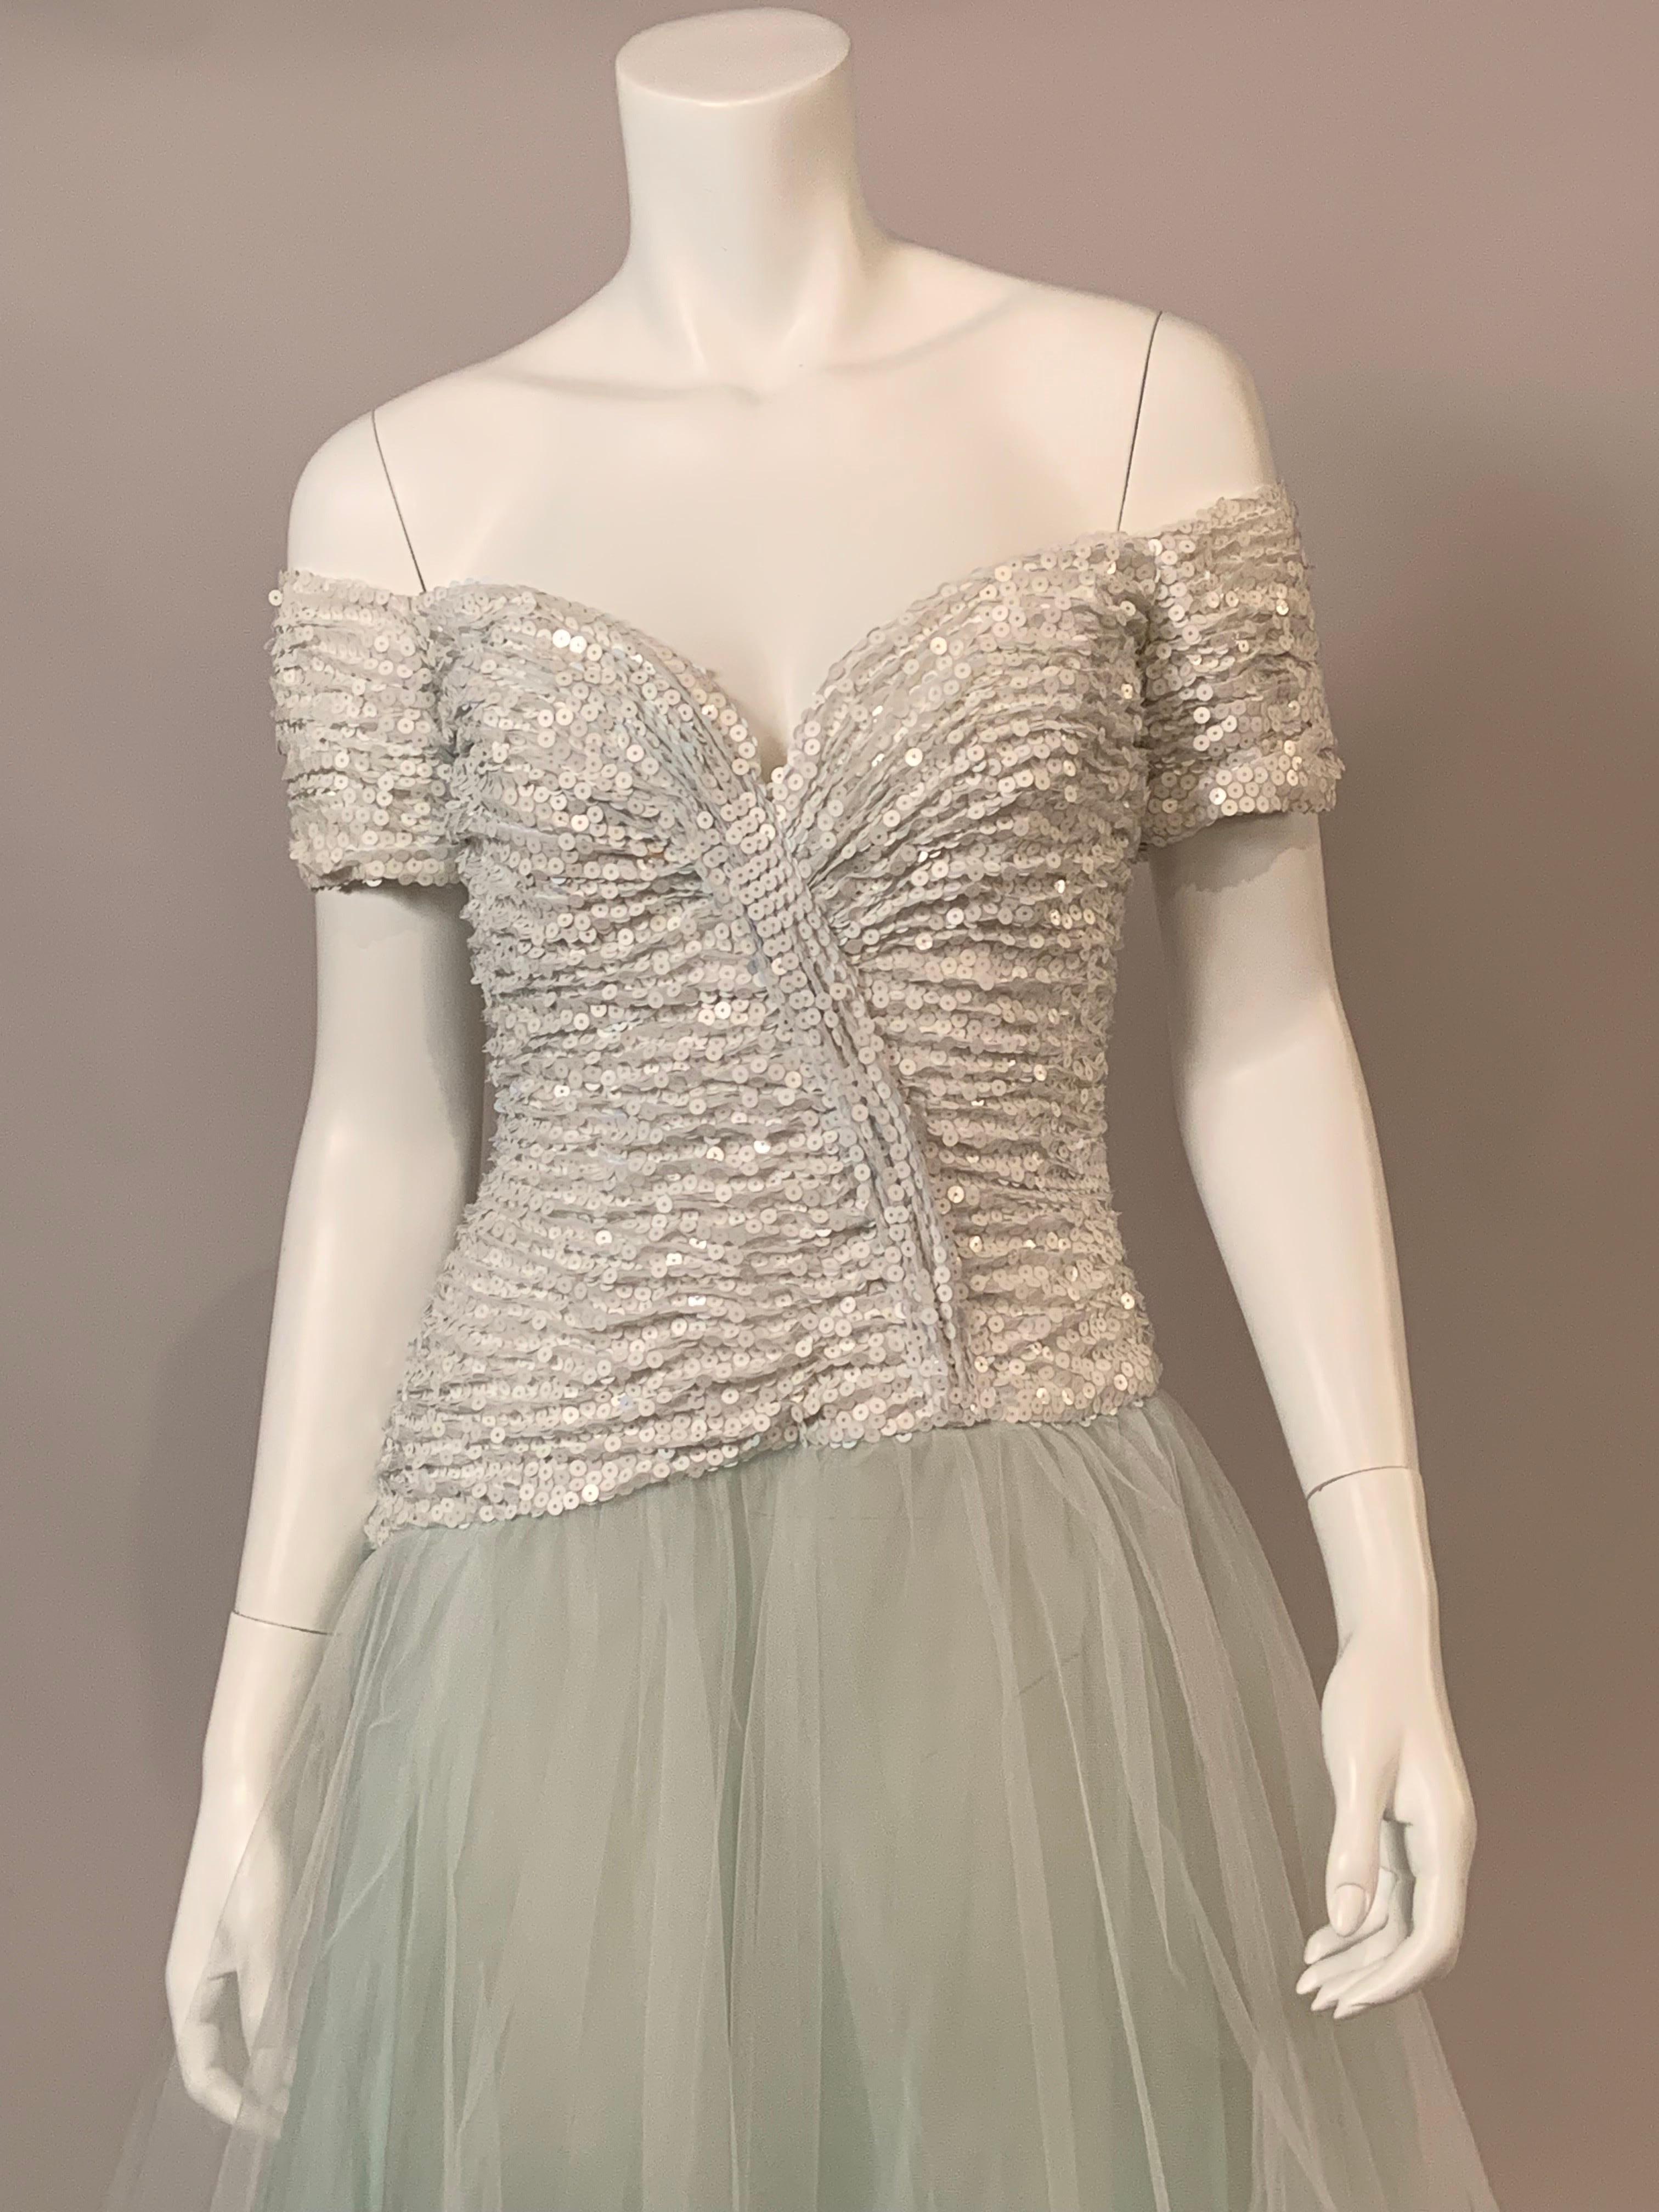 This dress is so romantic, it would be perfect for a wedding or a special formal event.  The off the shoulder bodice is gathered white chiffon covered with bright white sequins in a faux wrap style.  But the skirt!  This is made from four sheer